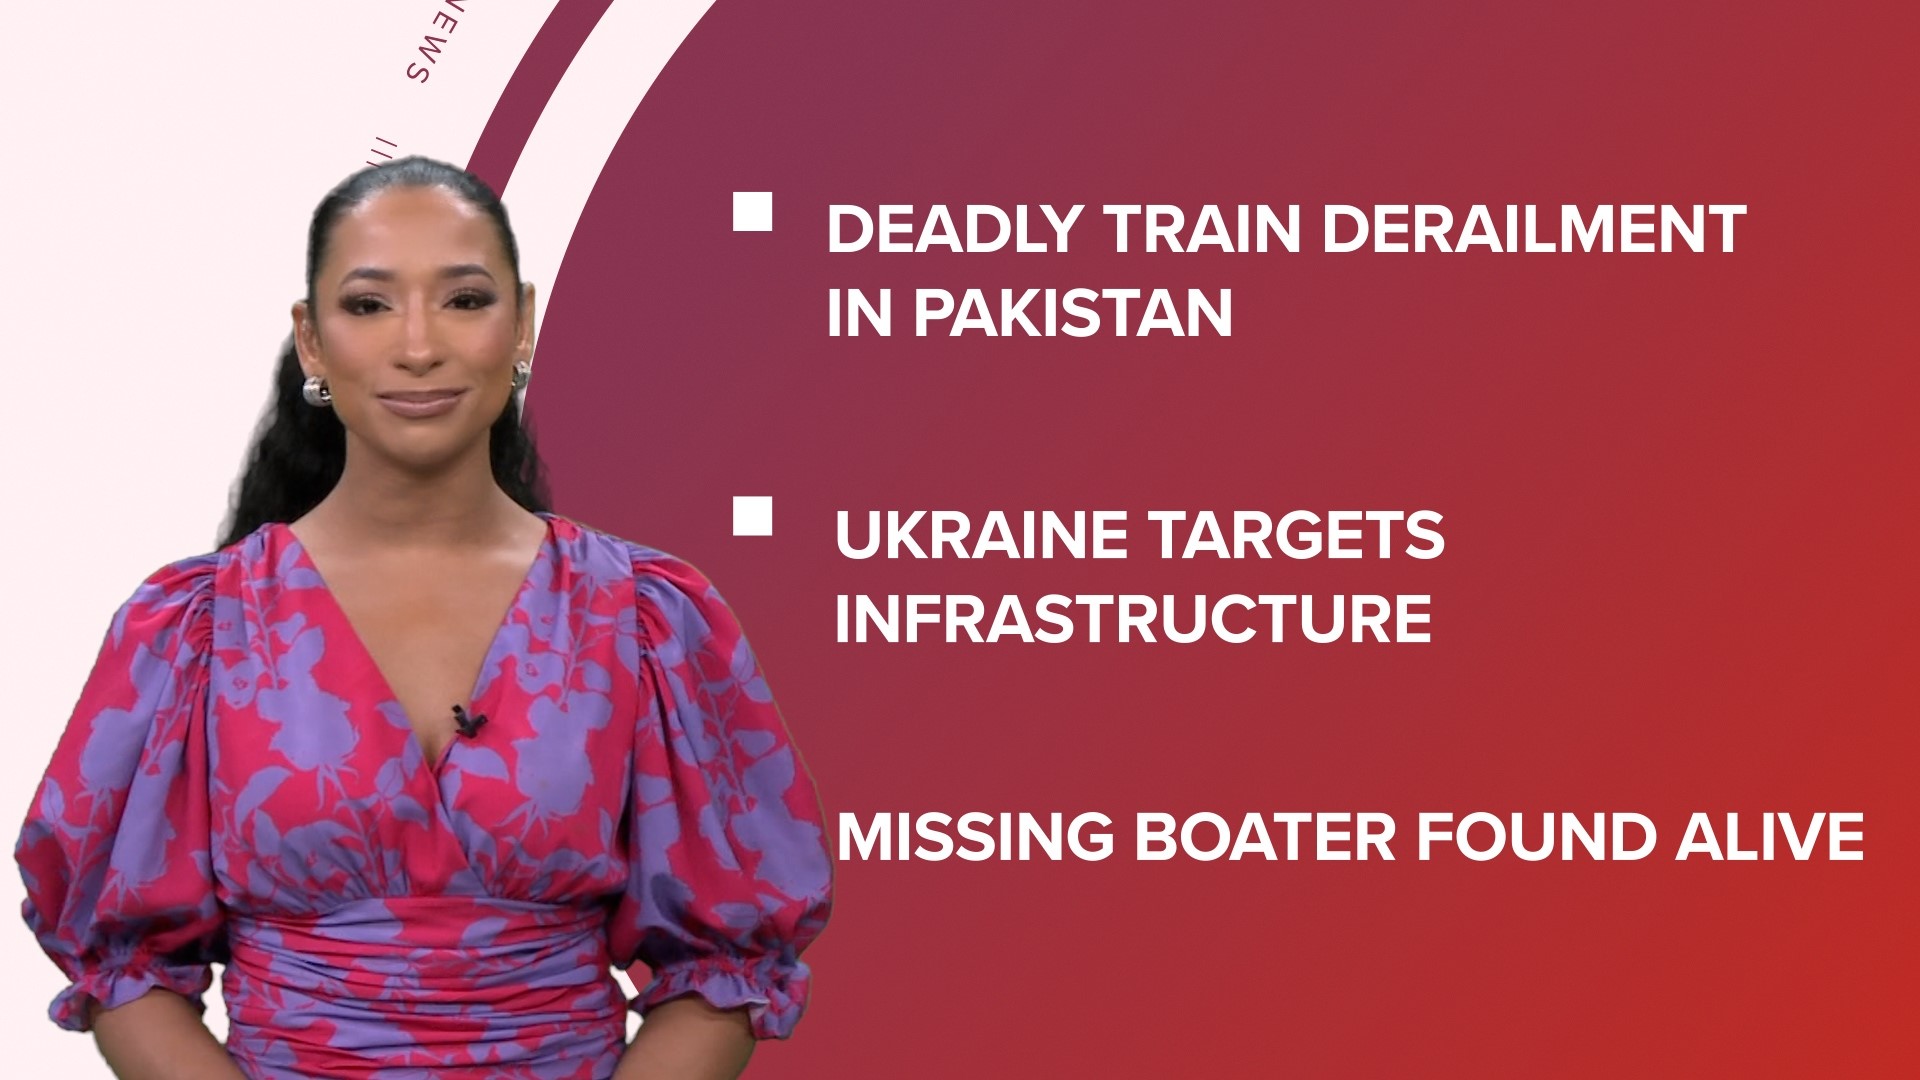 A look at what is happening in the news from a deadly train derailment in Pakistan to the FDA approving a postpartum depression pill and 'Barbie' hits $1B globally.